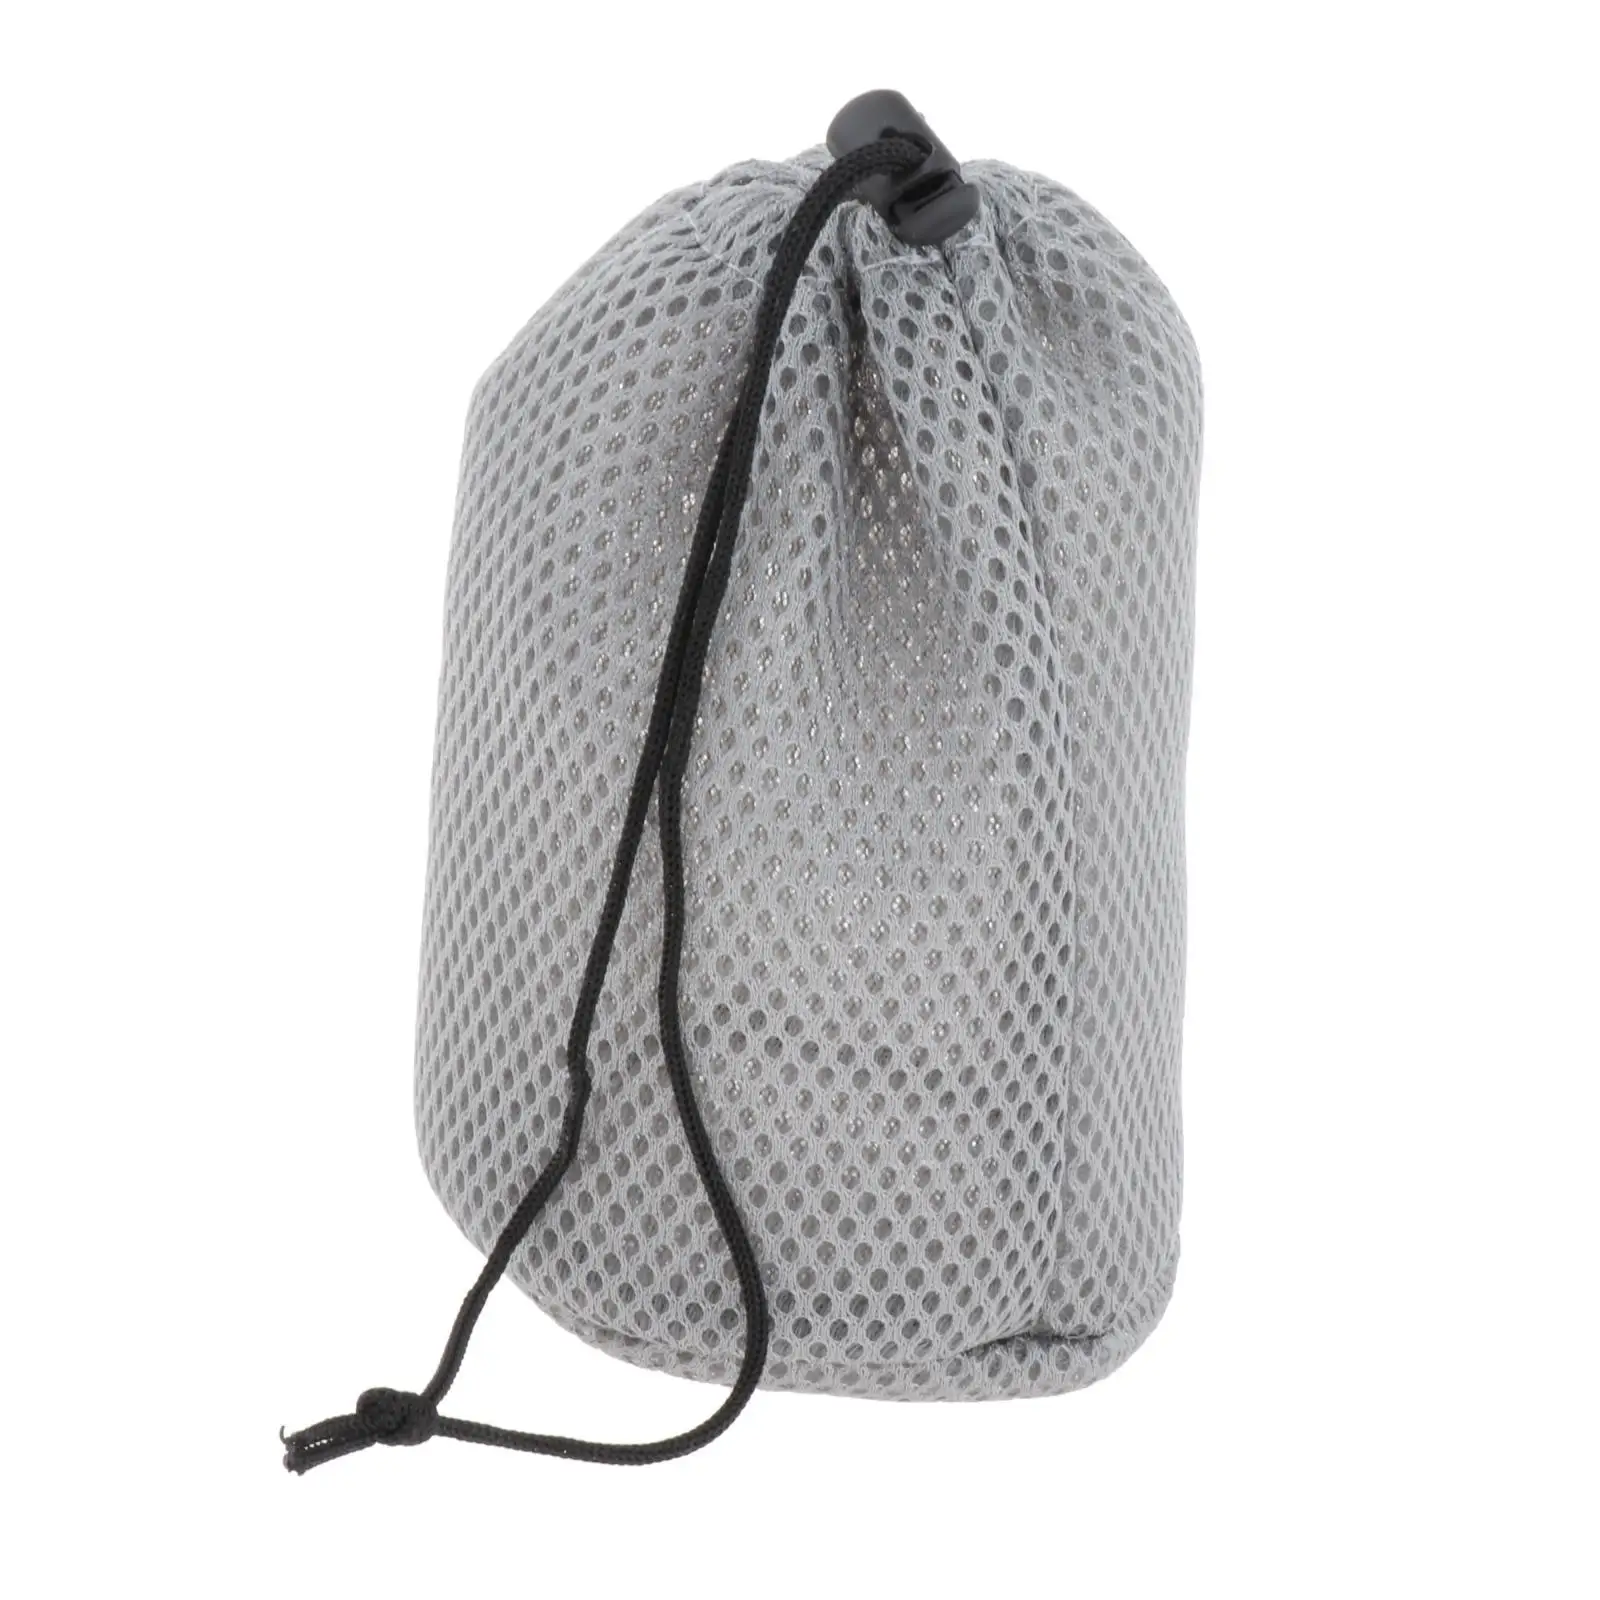 Portable Mesh Drawstring Bag Stuff Storage Sack Carry Case Pot Pan Carrier Pouch Organizer for Travel Outdoor Camping Hiking